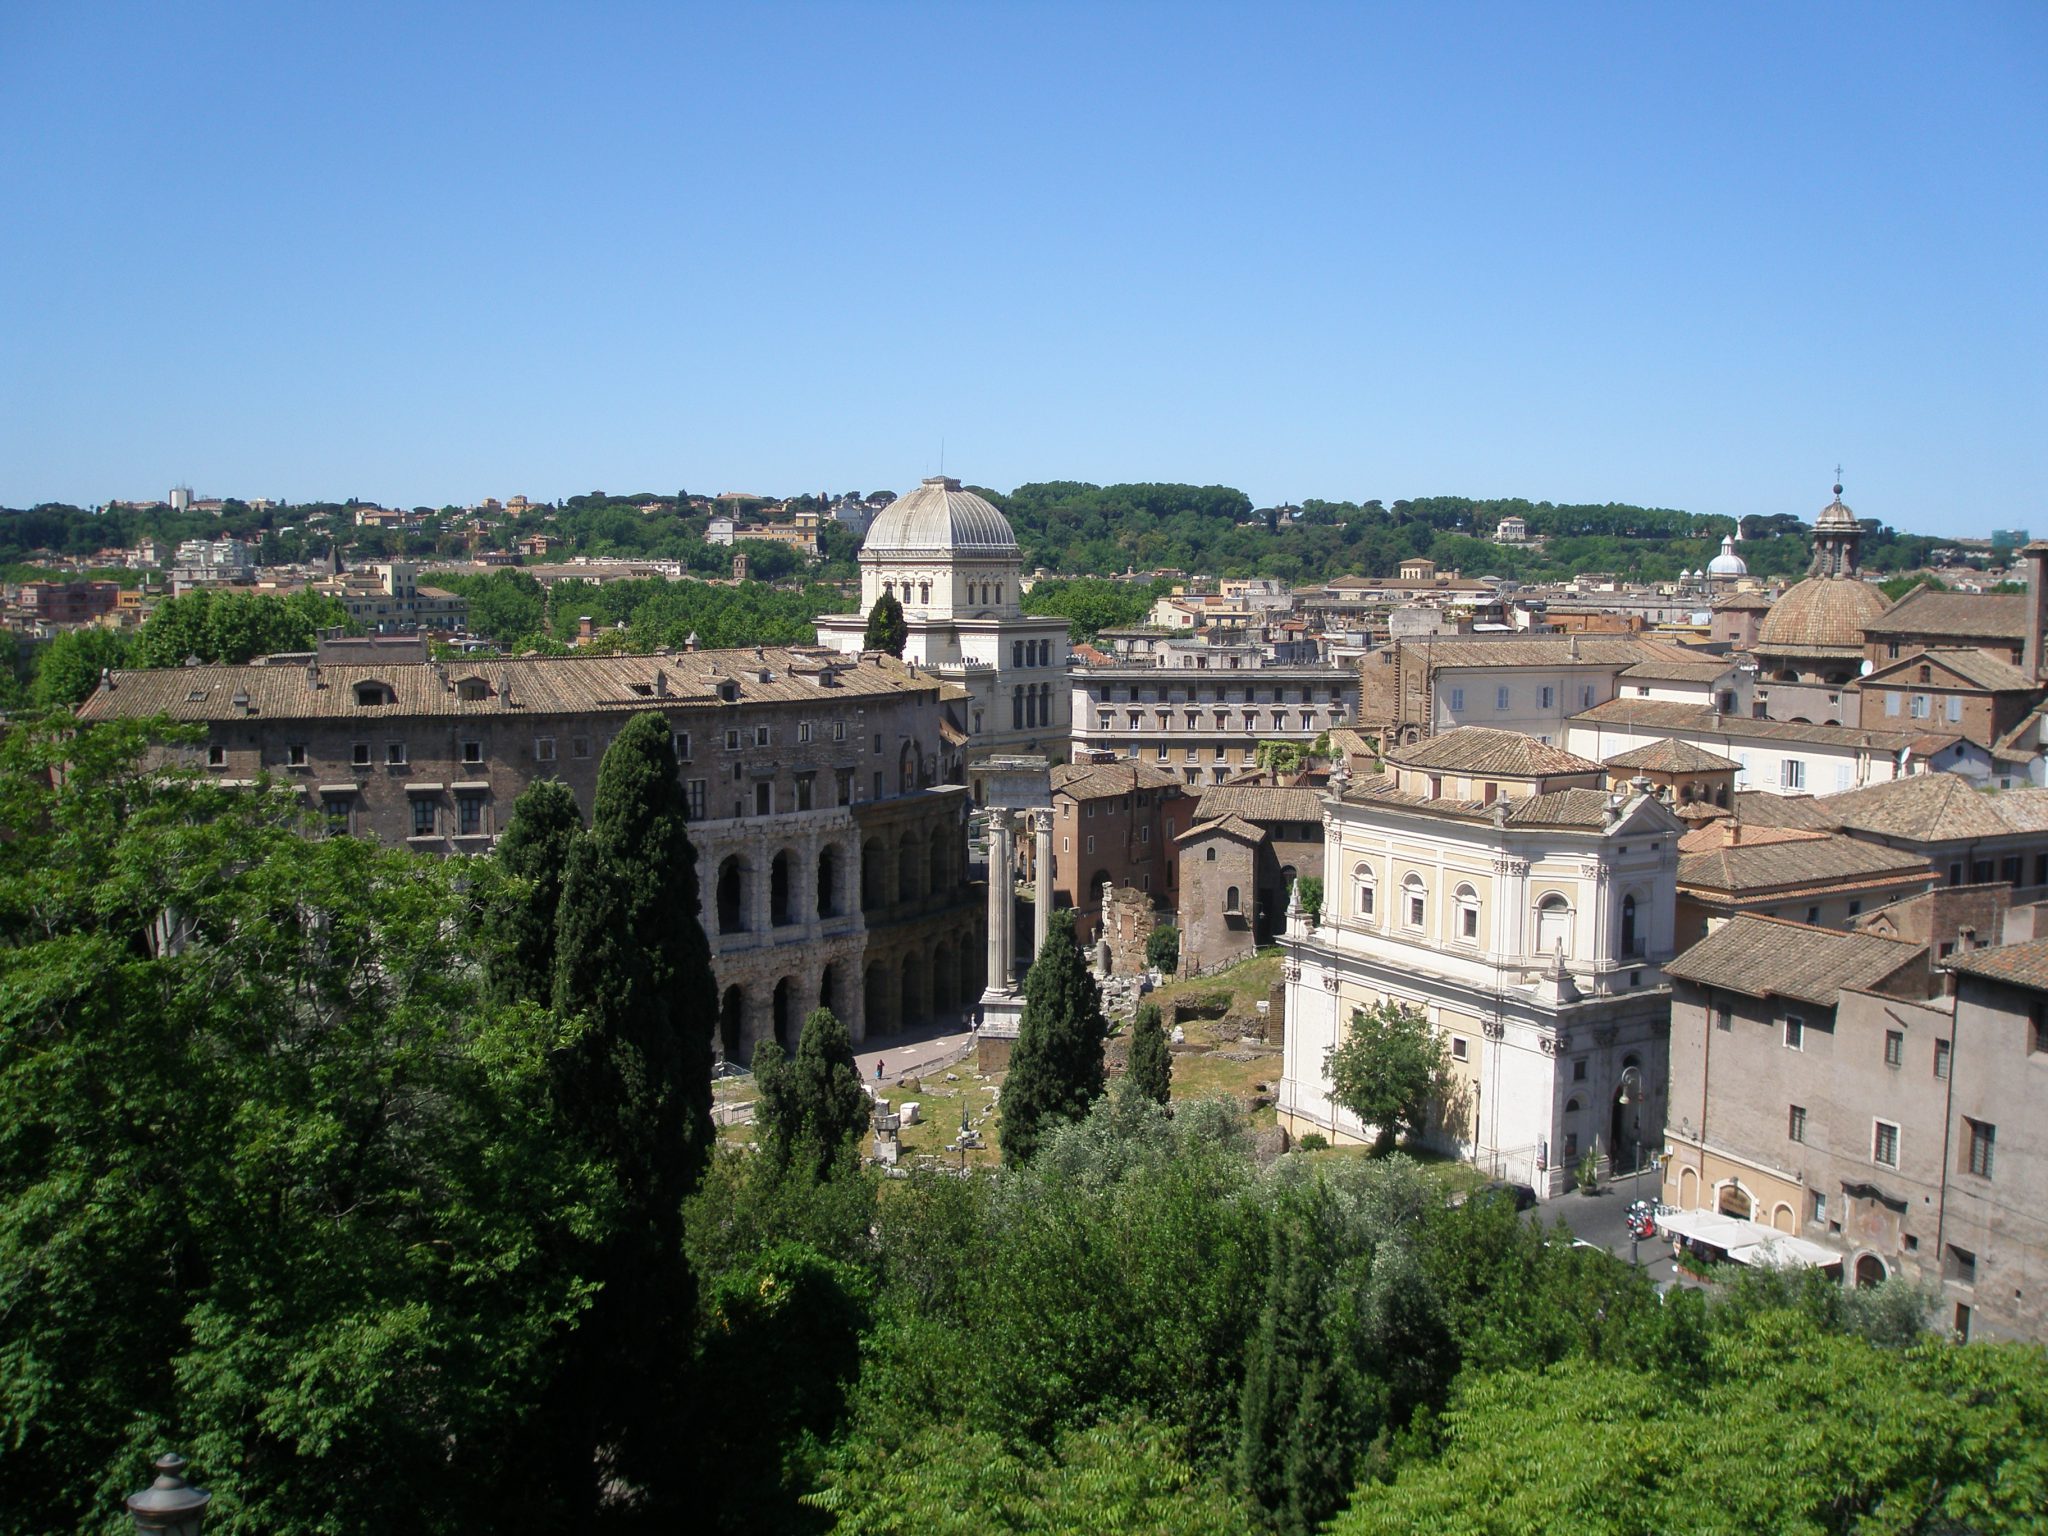 My view from the roof terrace Cafe at the Capitoline Museum...westward, toward Trastevere, and the green expanses of the Janiculum Hill (and to my wonderful Hotel).